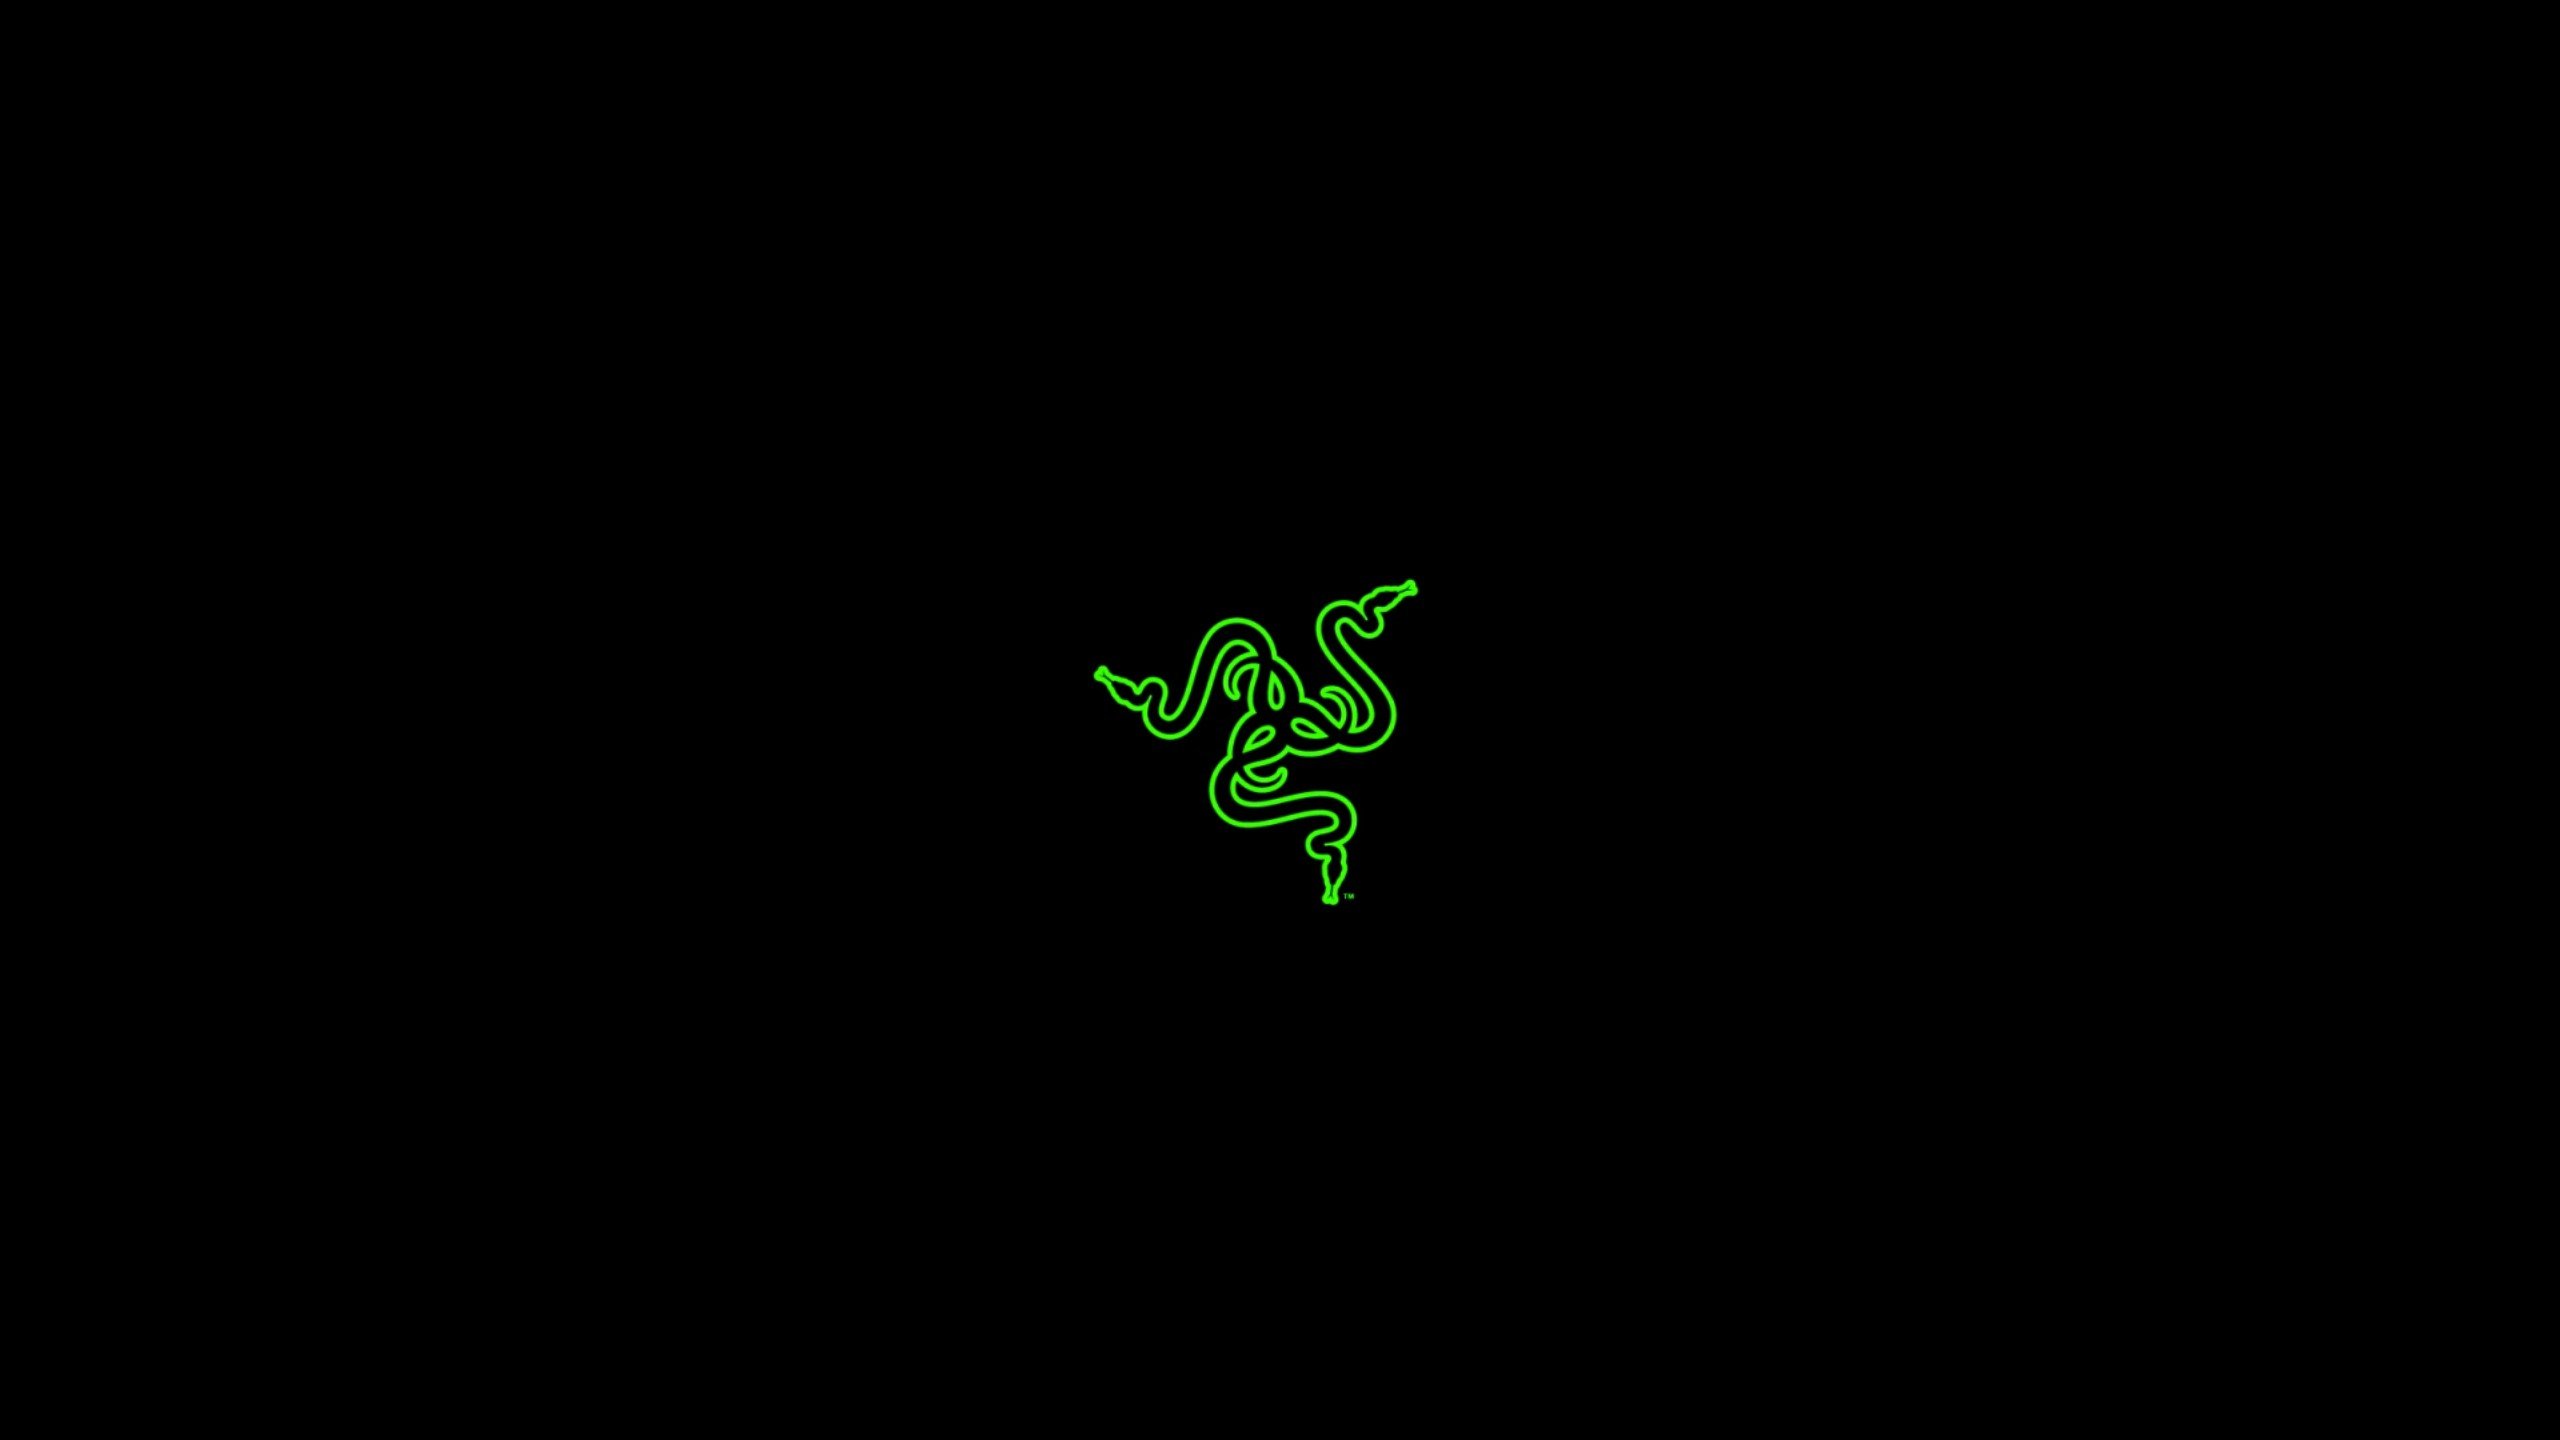 Razer Pc Master Race Pc Gaming Hd Wallpapers Desktop And Mobile Images Photos